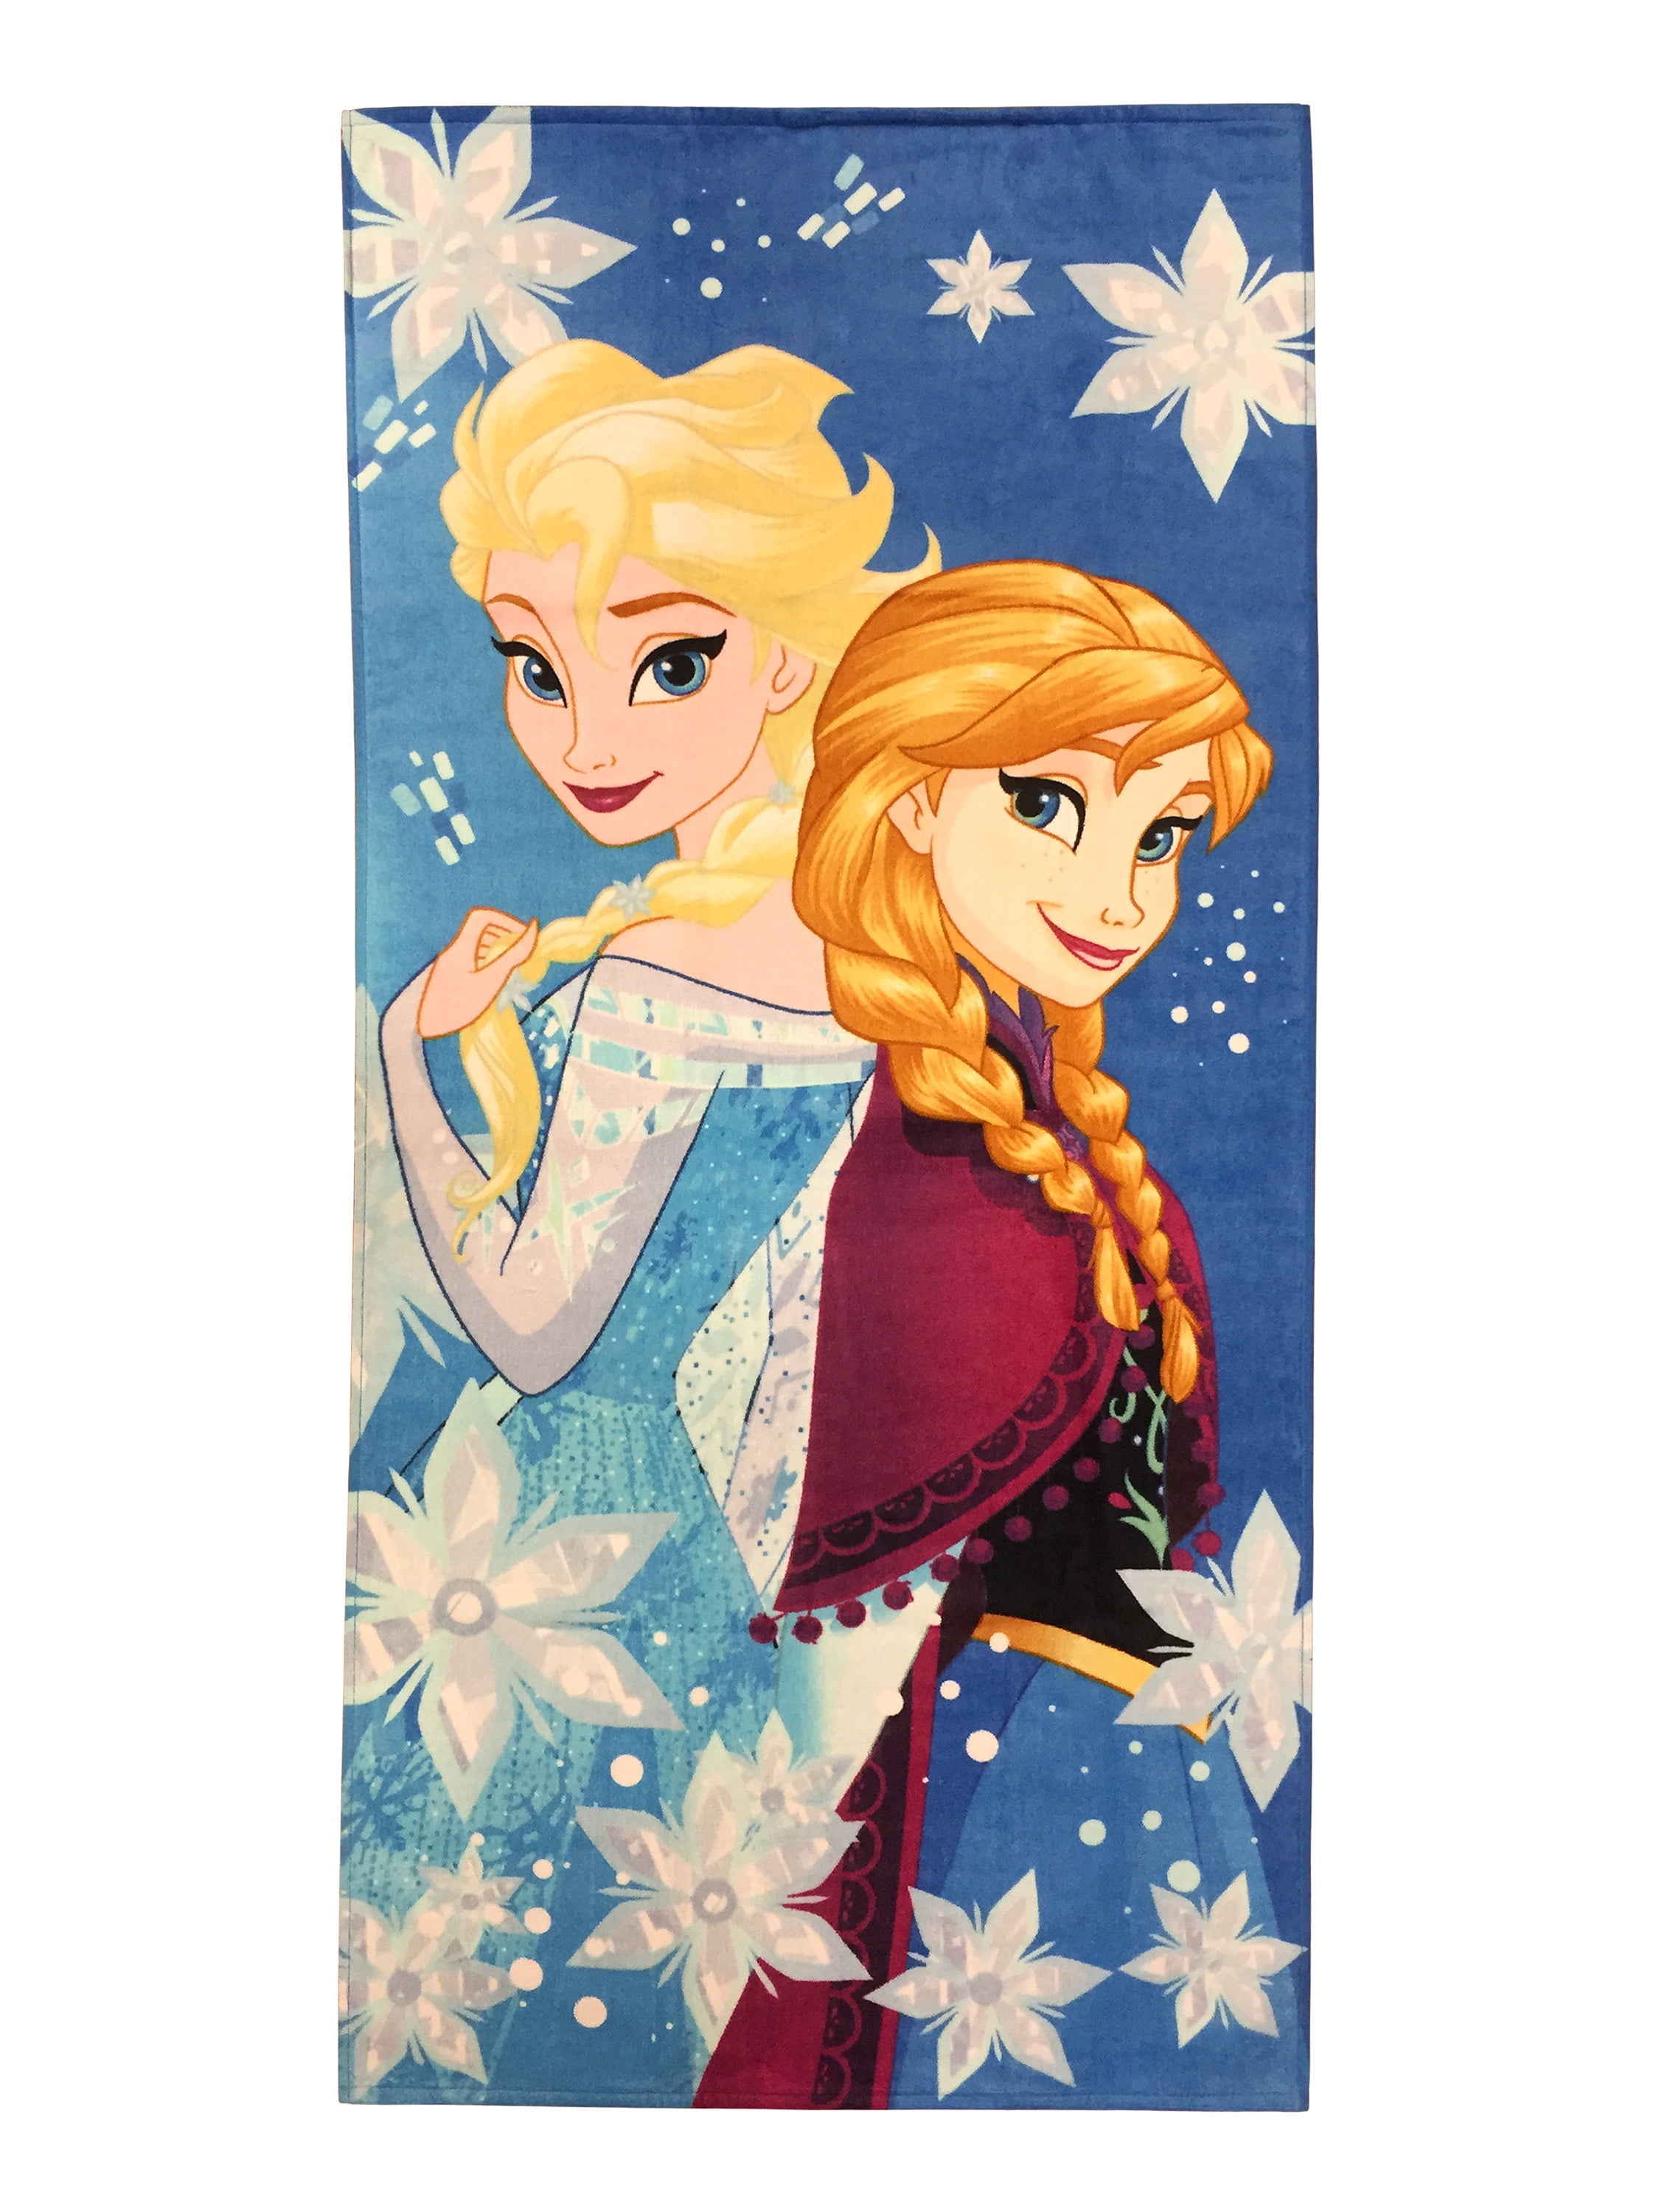 Disney Frozen Beach Towel 28x58 Inches 100% cotton FAST FREE SHIPPING 